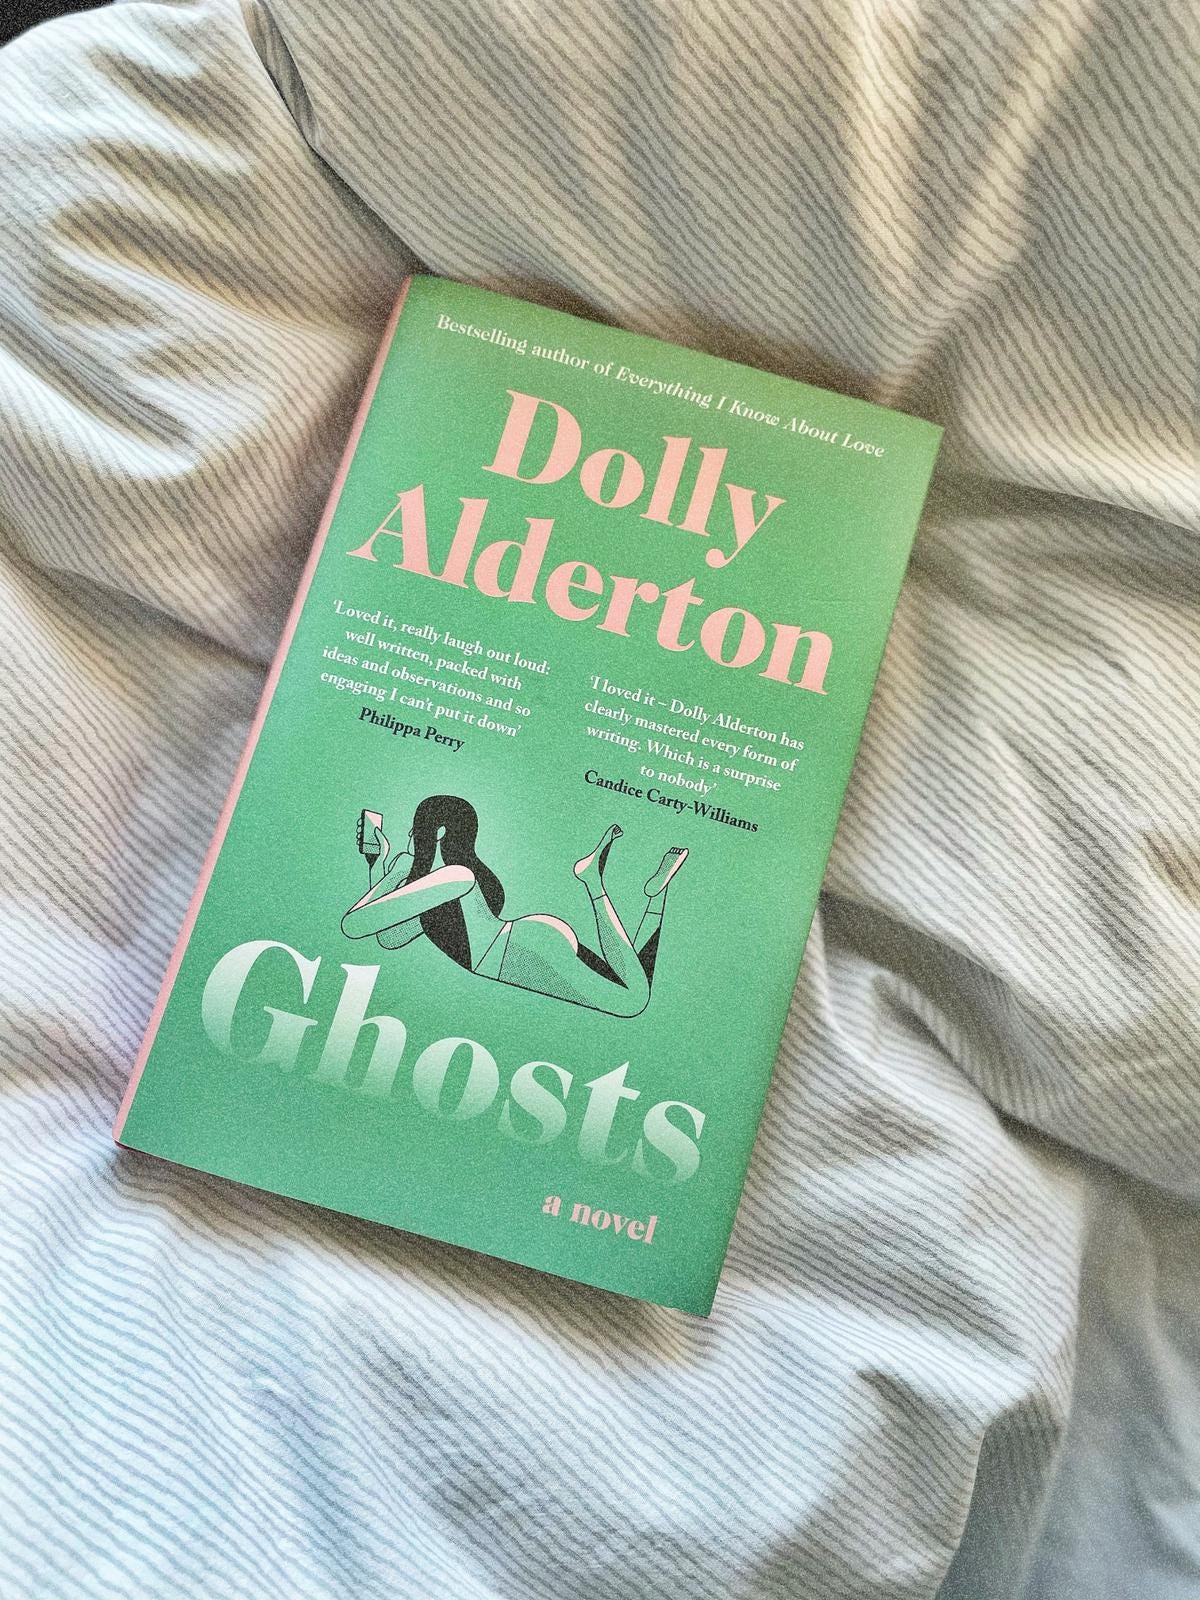 Ghosts — Dolly Alderton. I first came across Dolly Alderton…, by Occy Carr